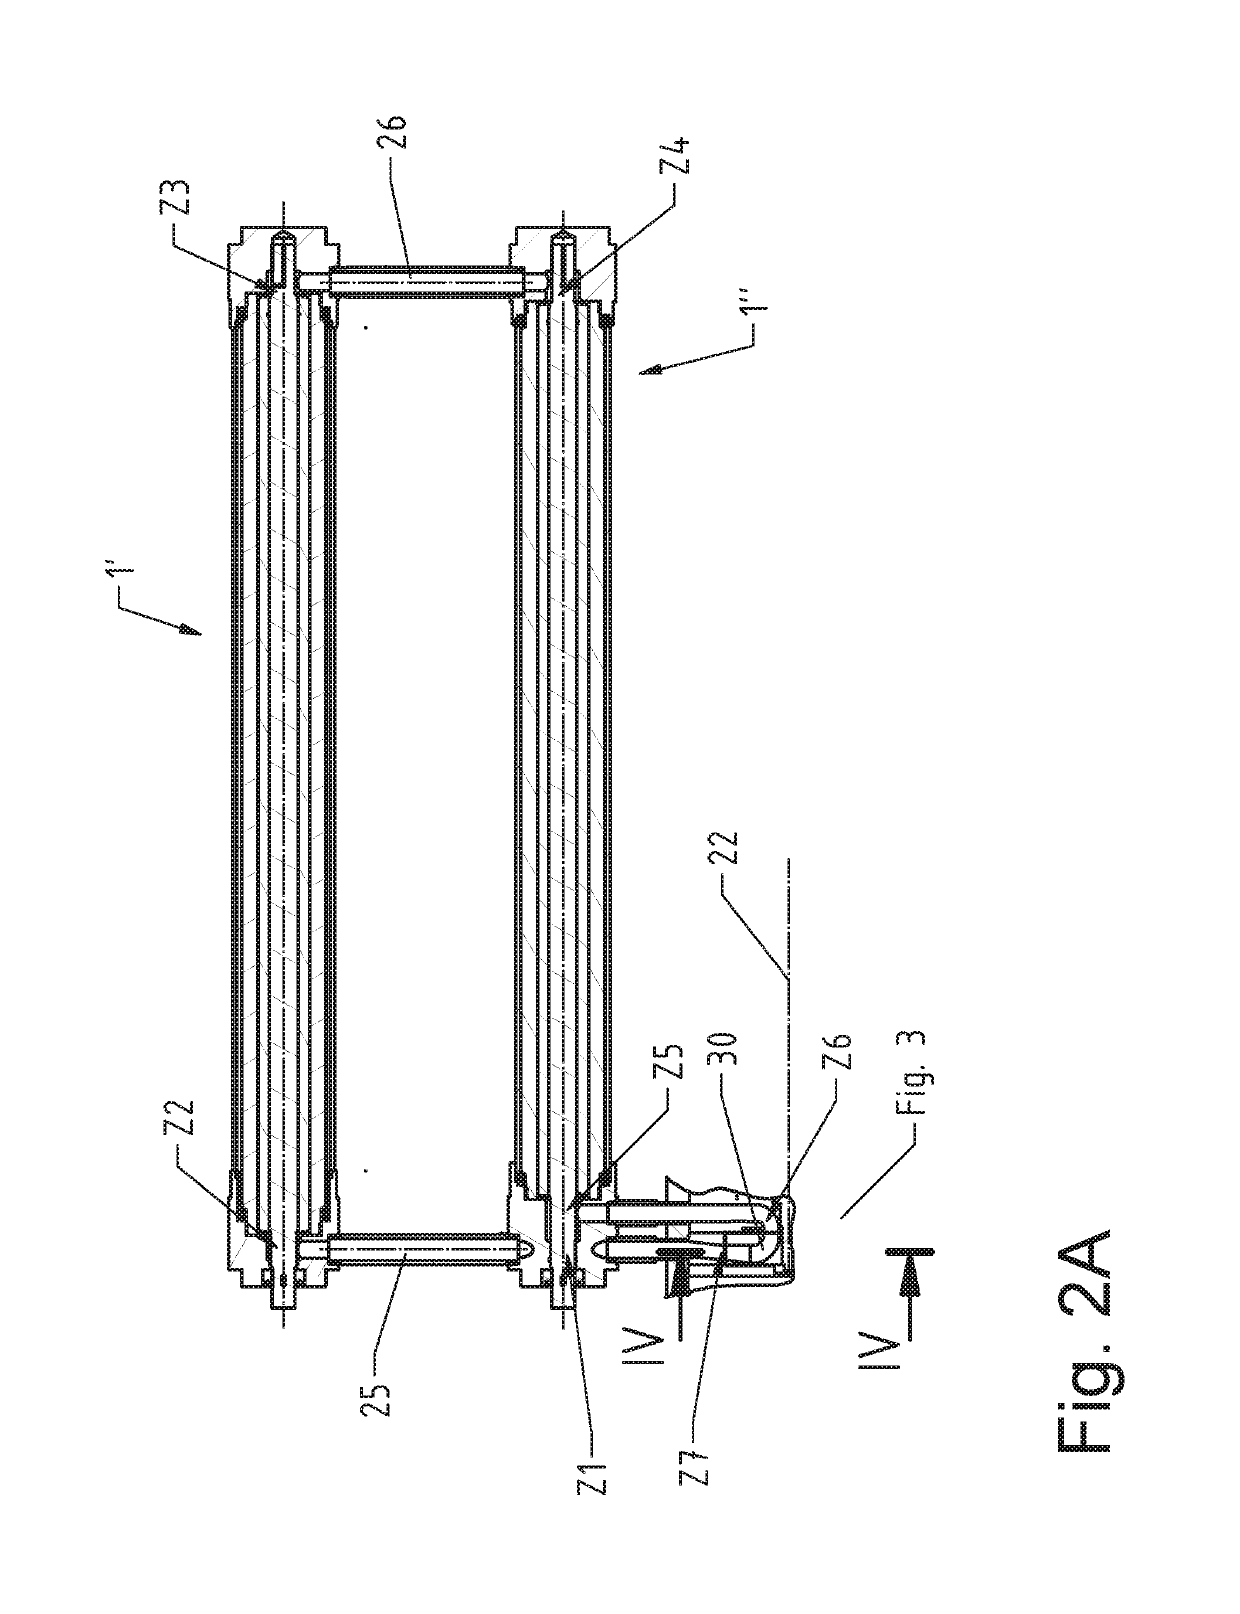 Device and method for converting thermal energy